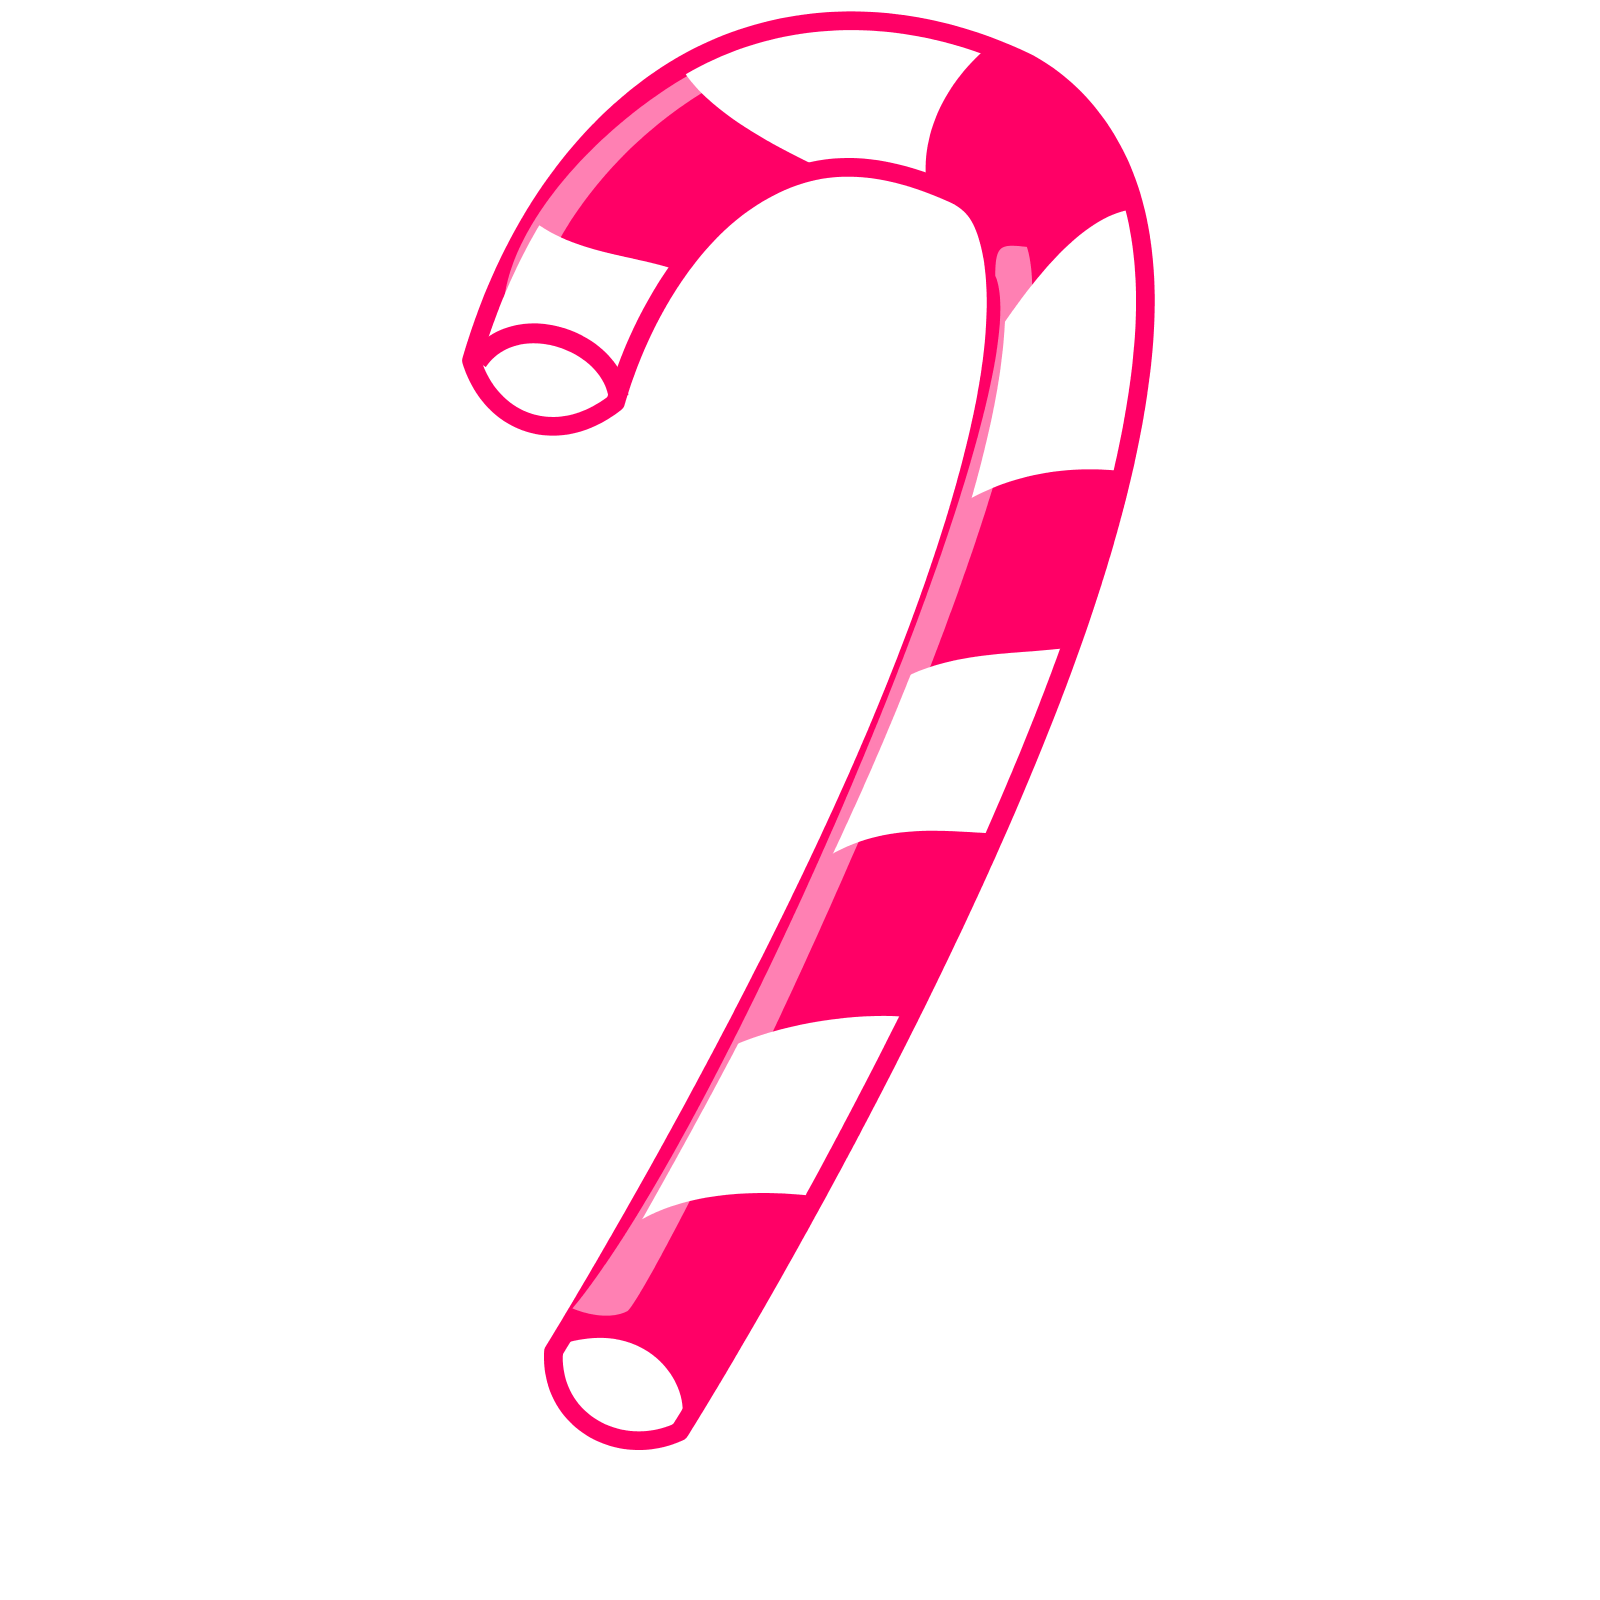 Candy Cane For Christmas Decoration Image Christmas Candy Cane